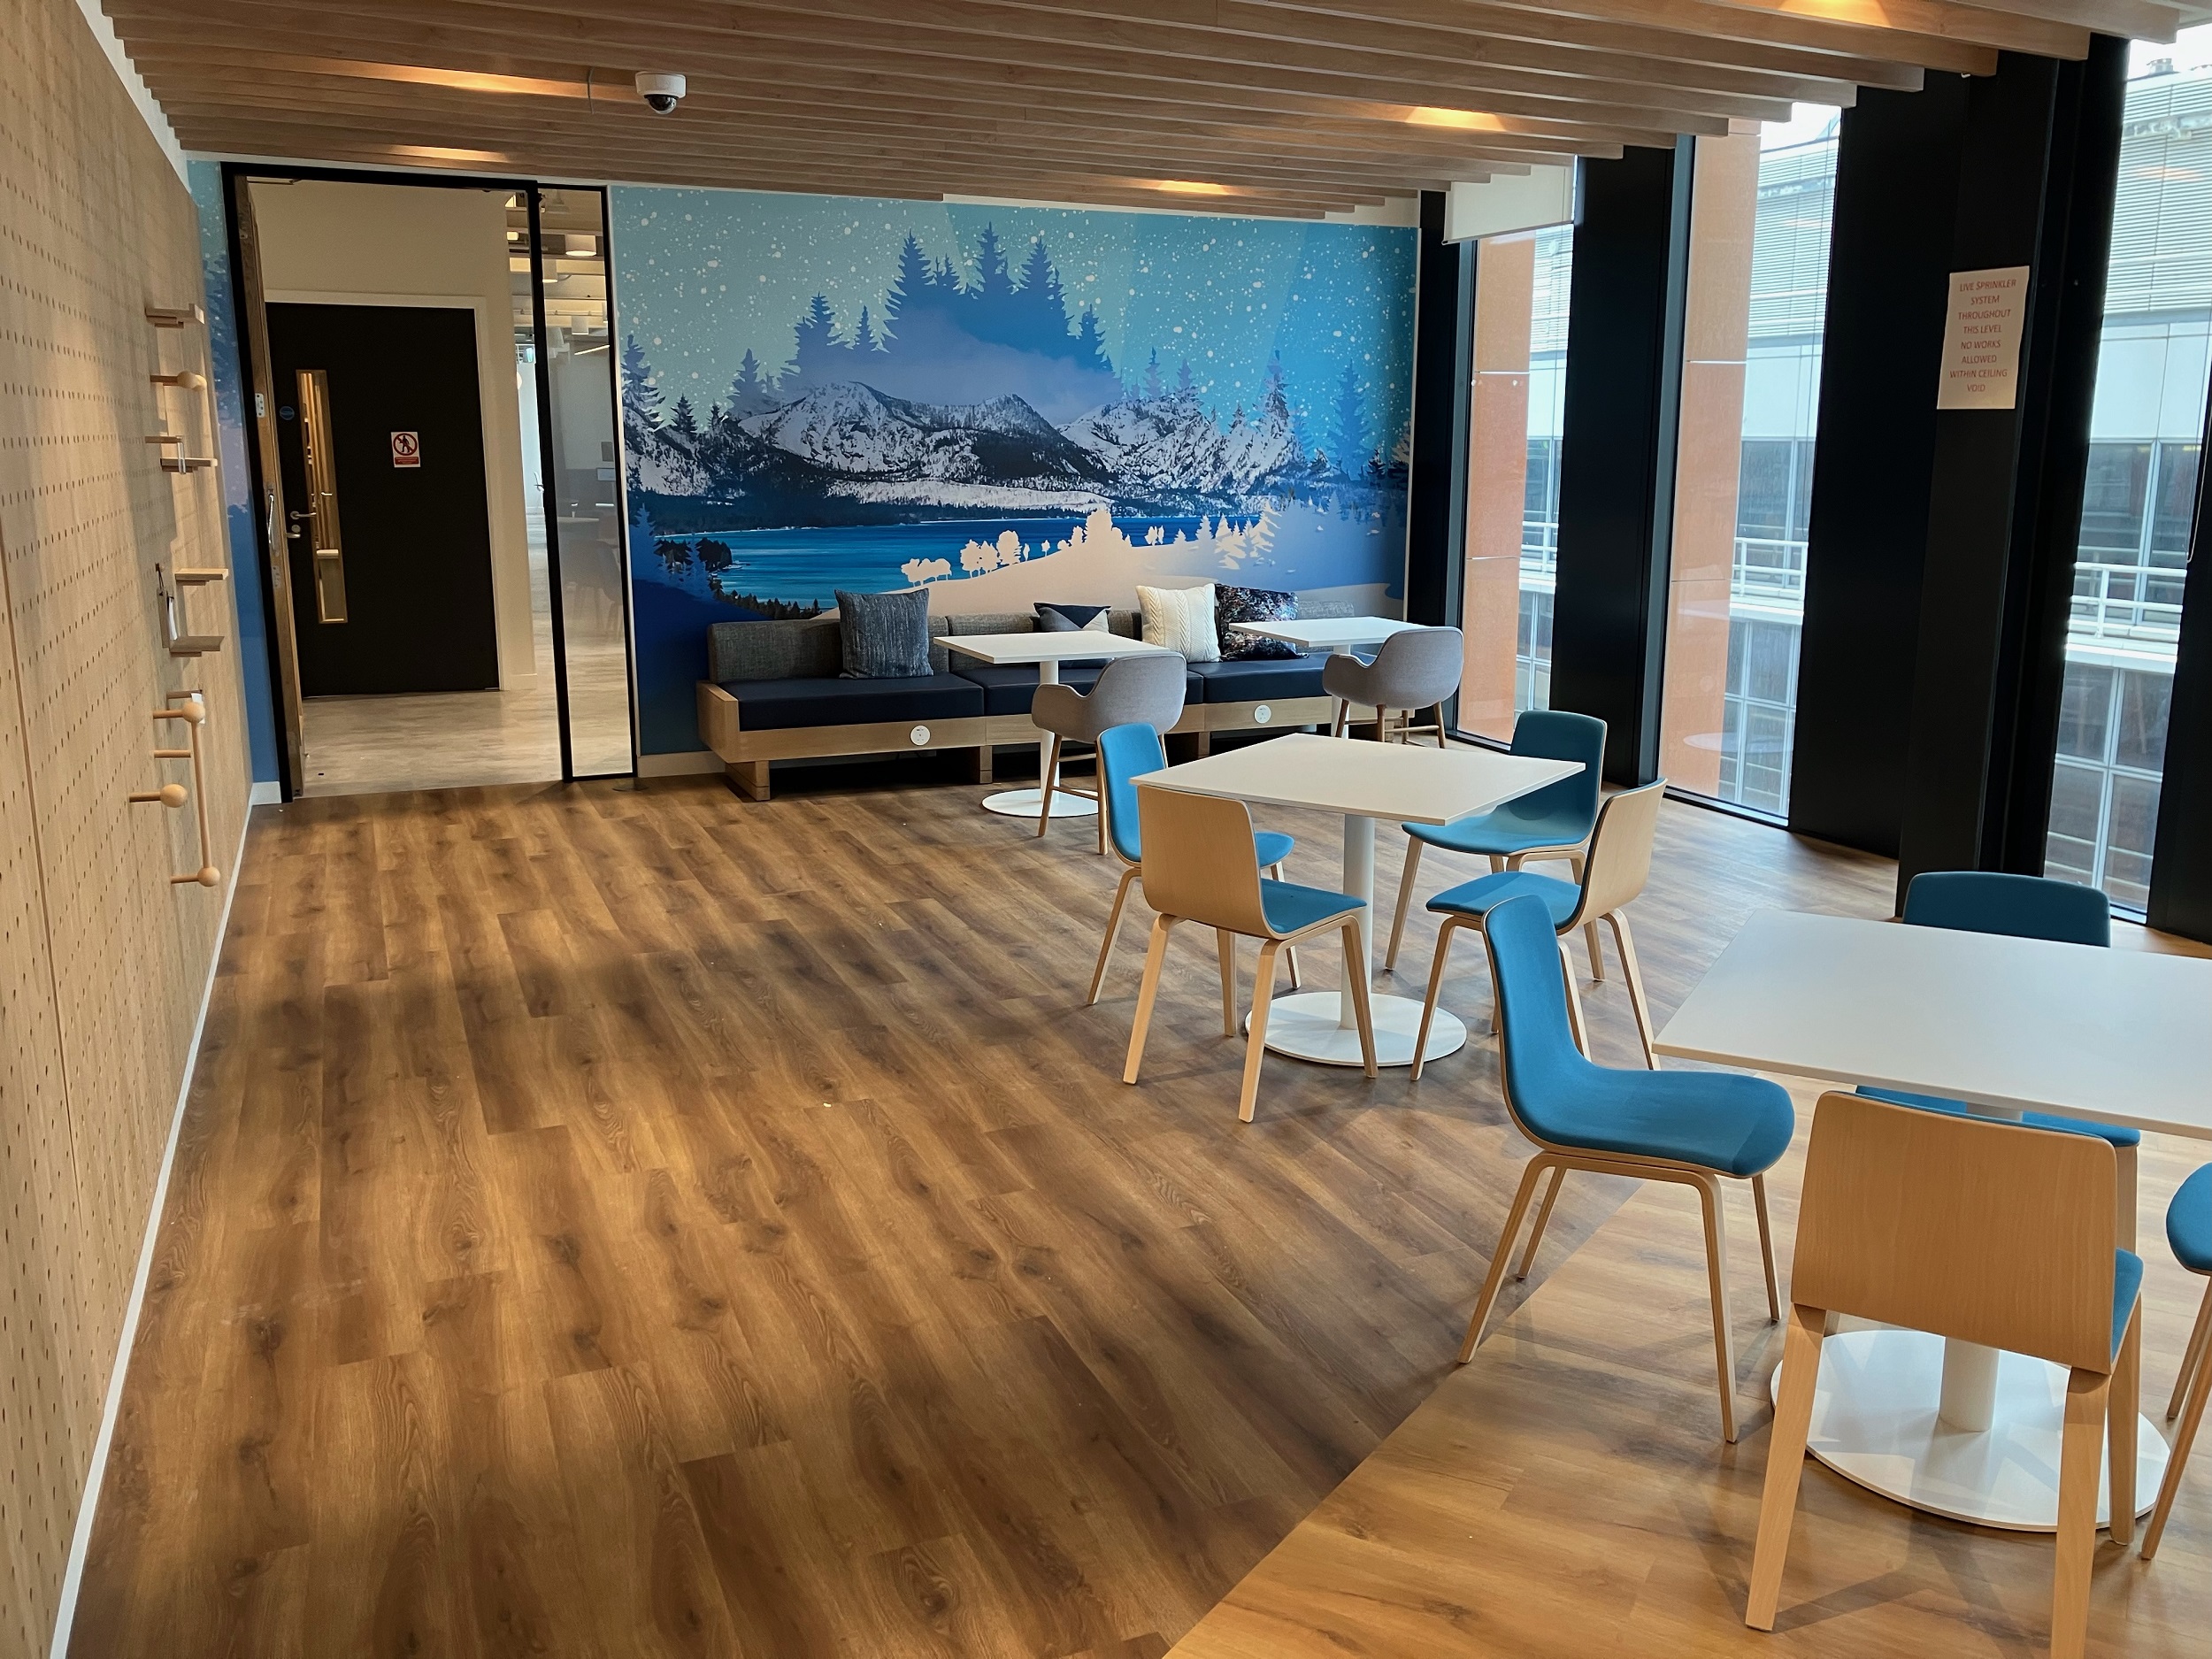 Loughton Contracts installed new LVT flooring from IVC Commercial to this new office space in London.